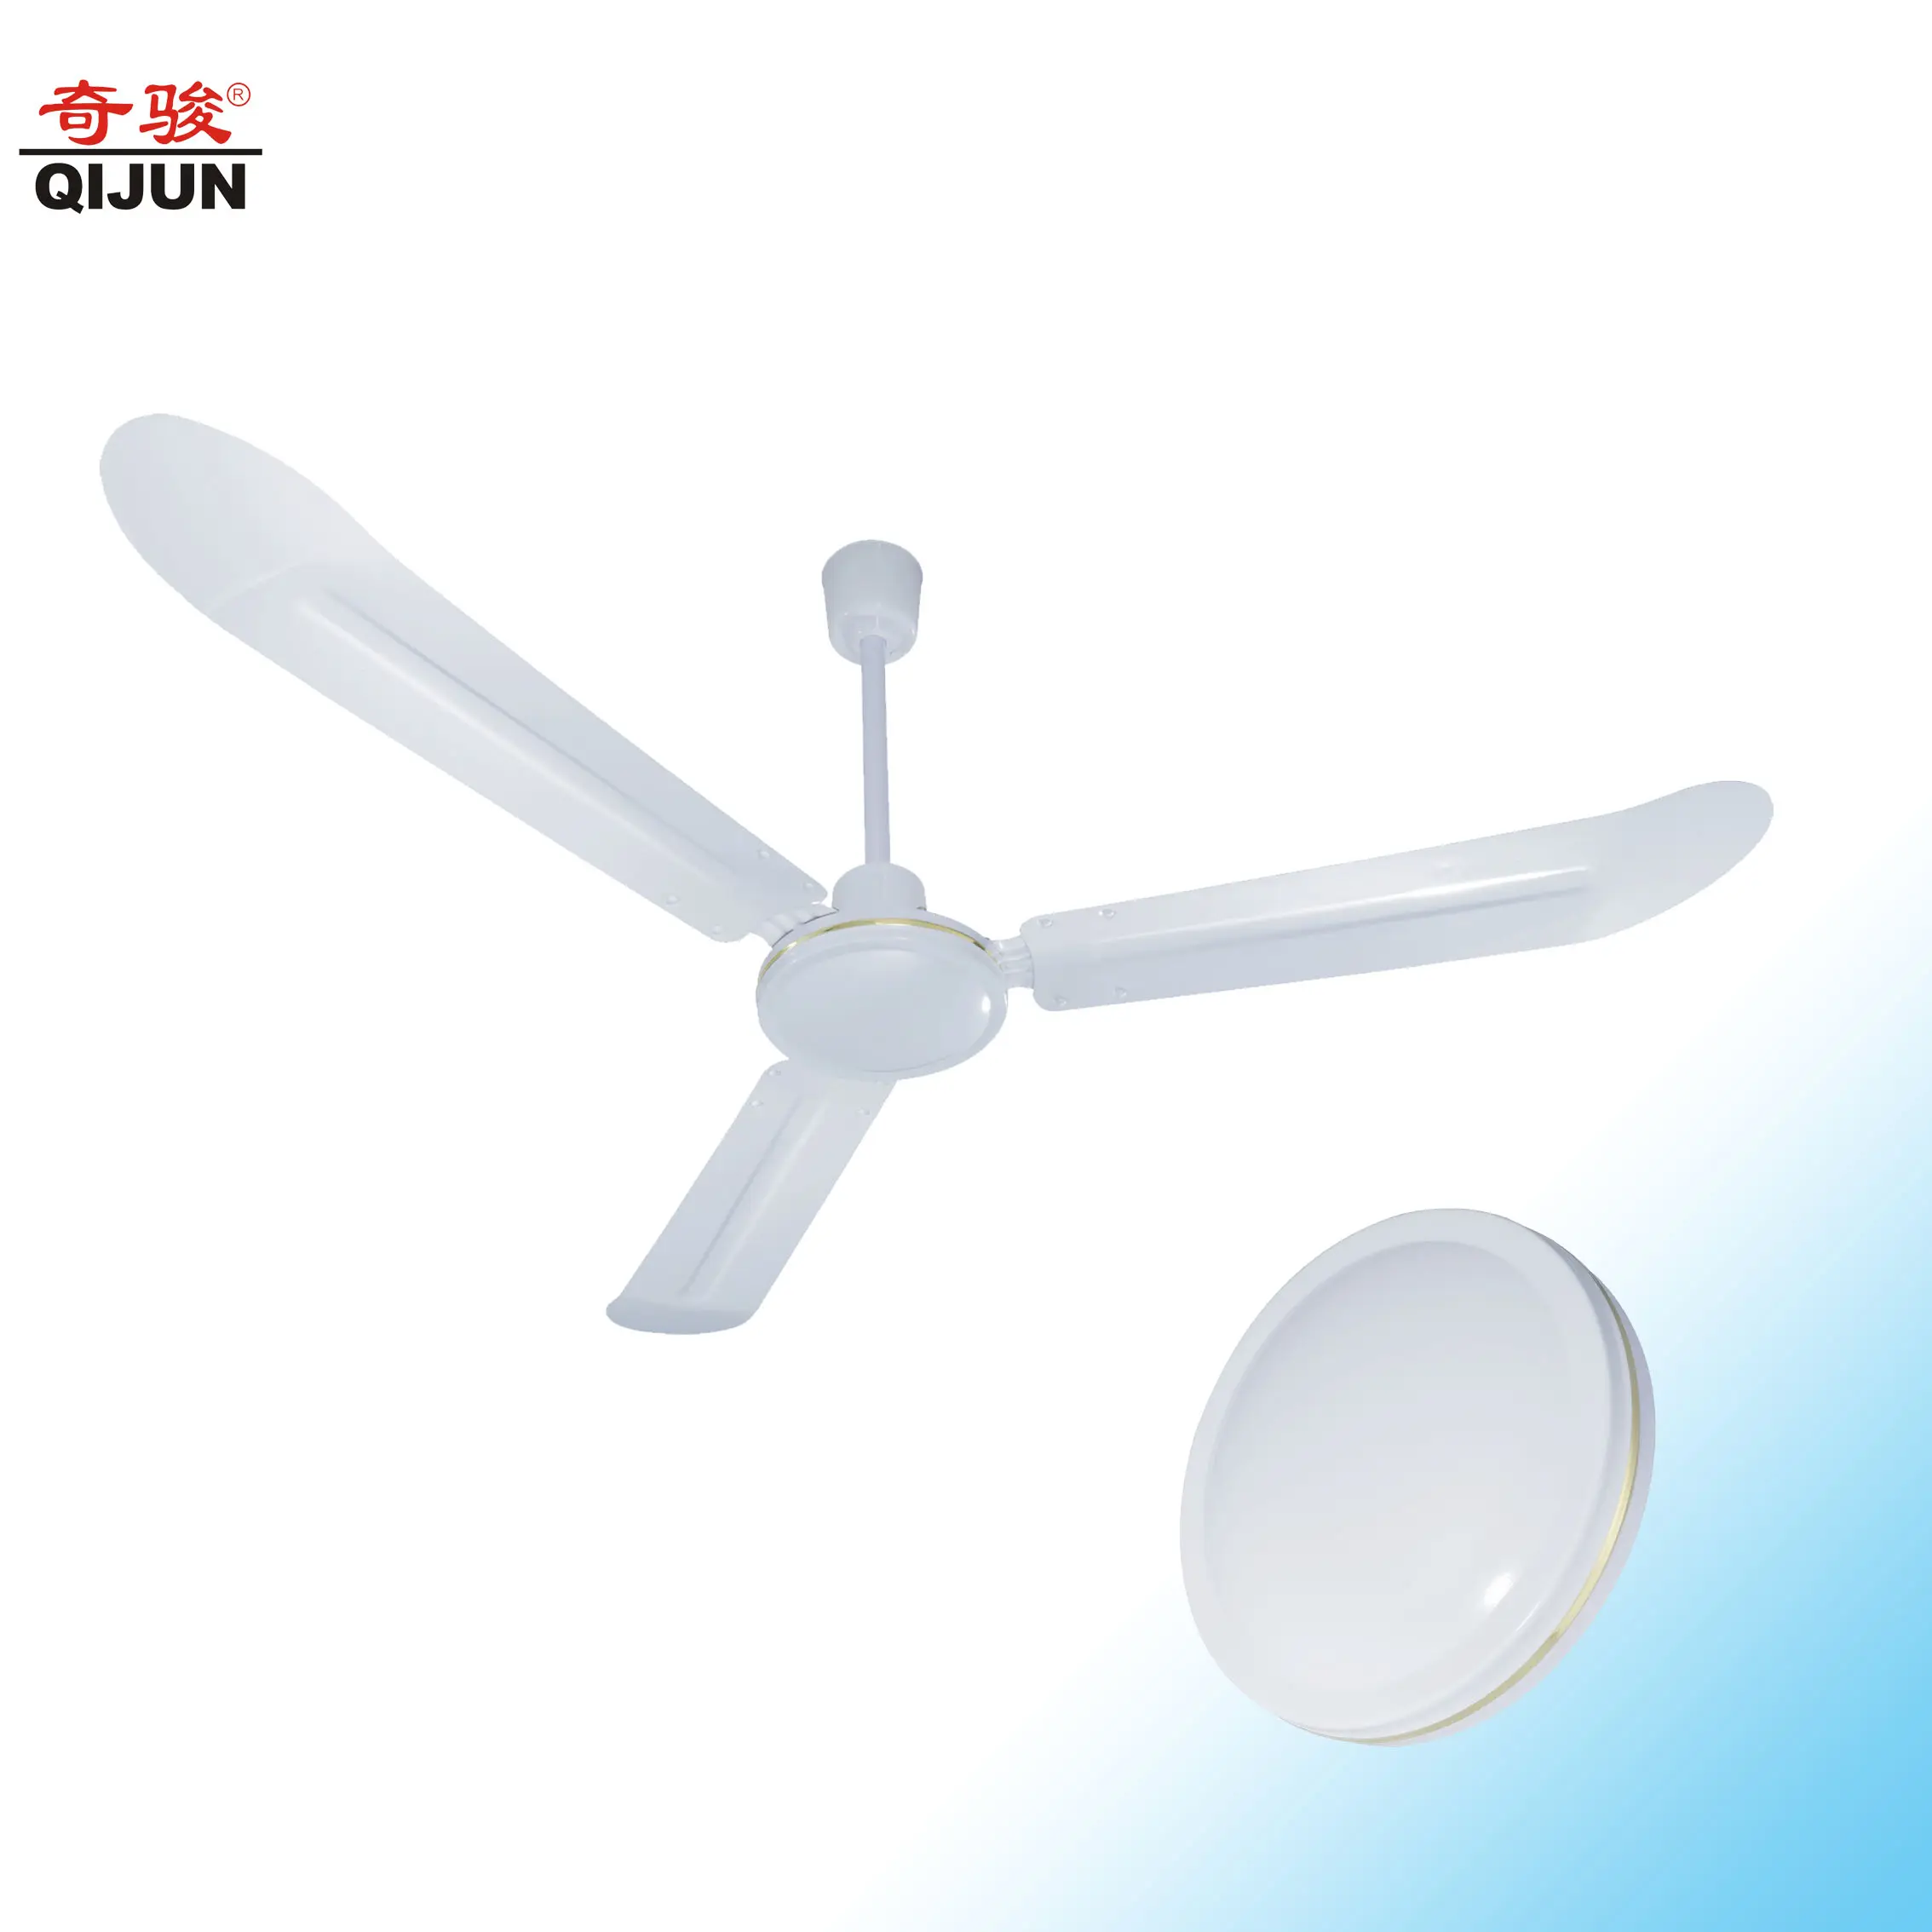 The world's best selling Toshiba ceiling fan factory 56 inch curved blade ceiling fan